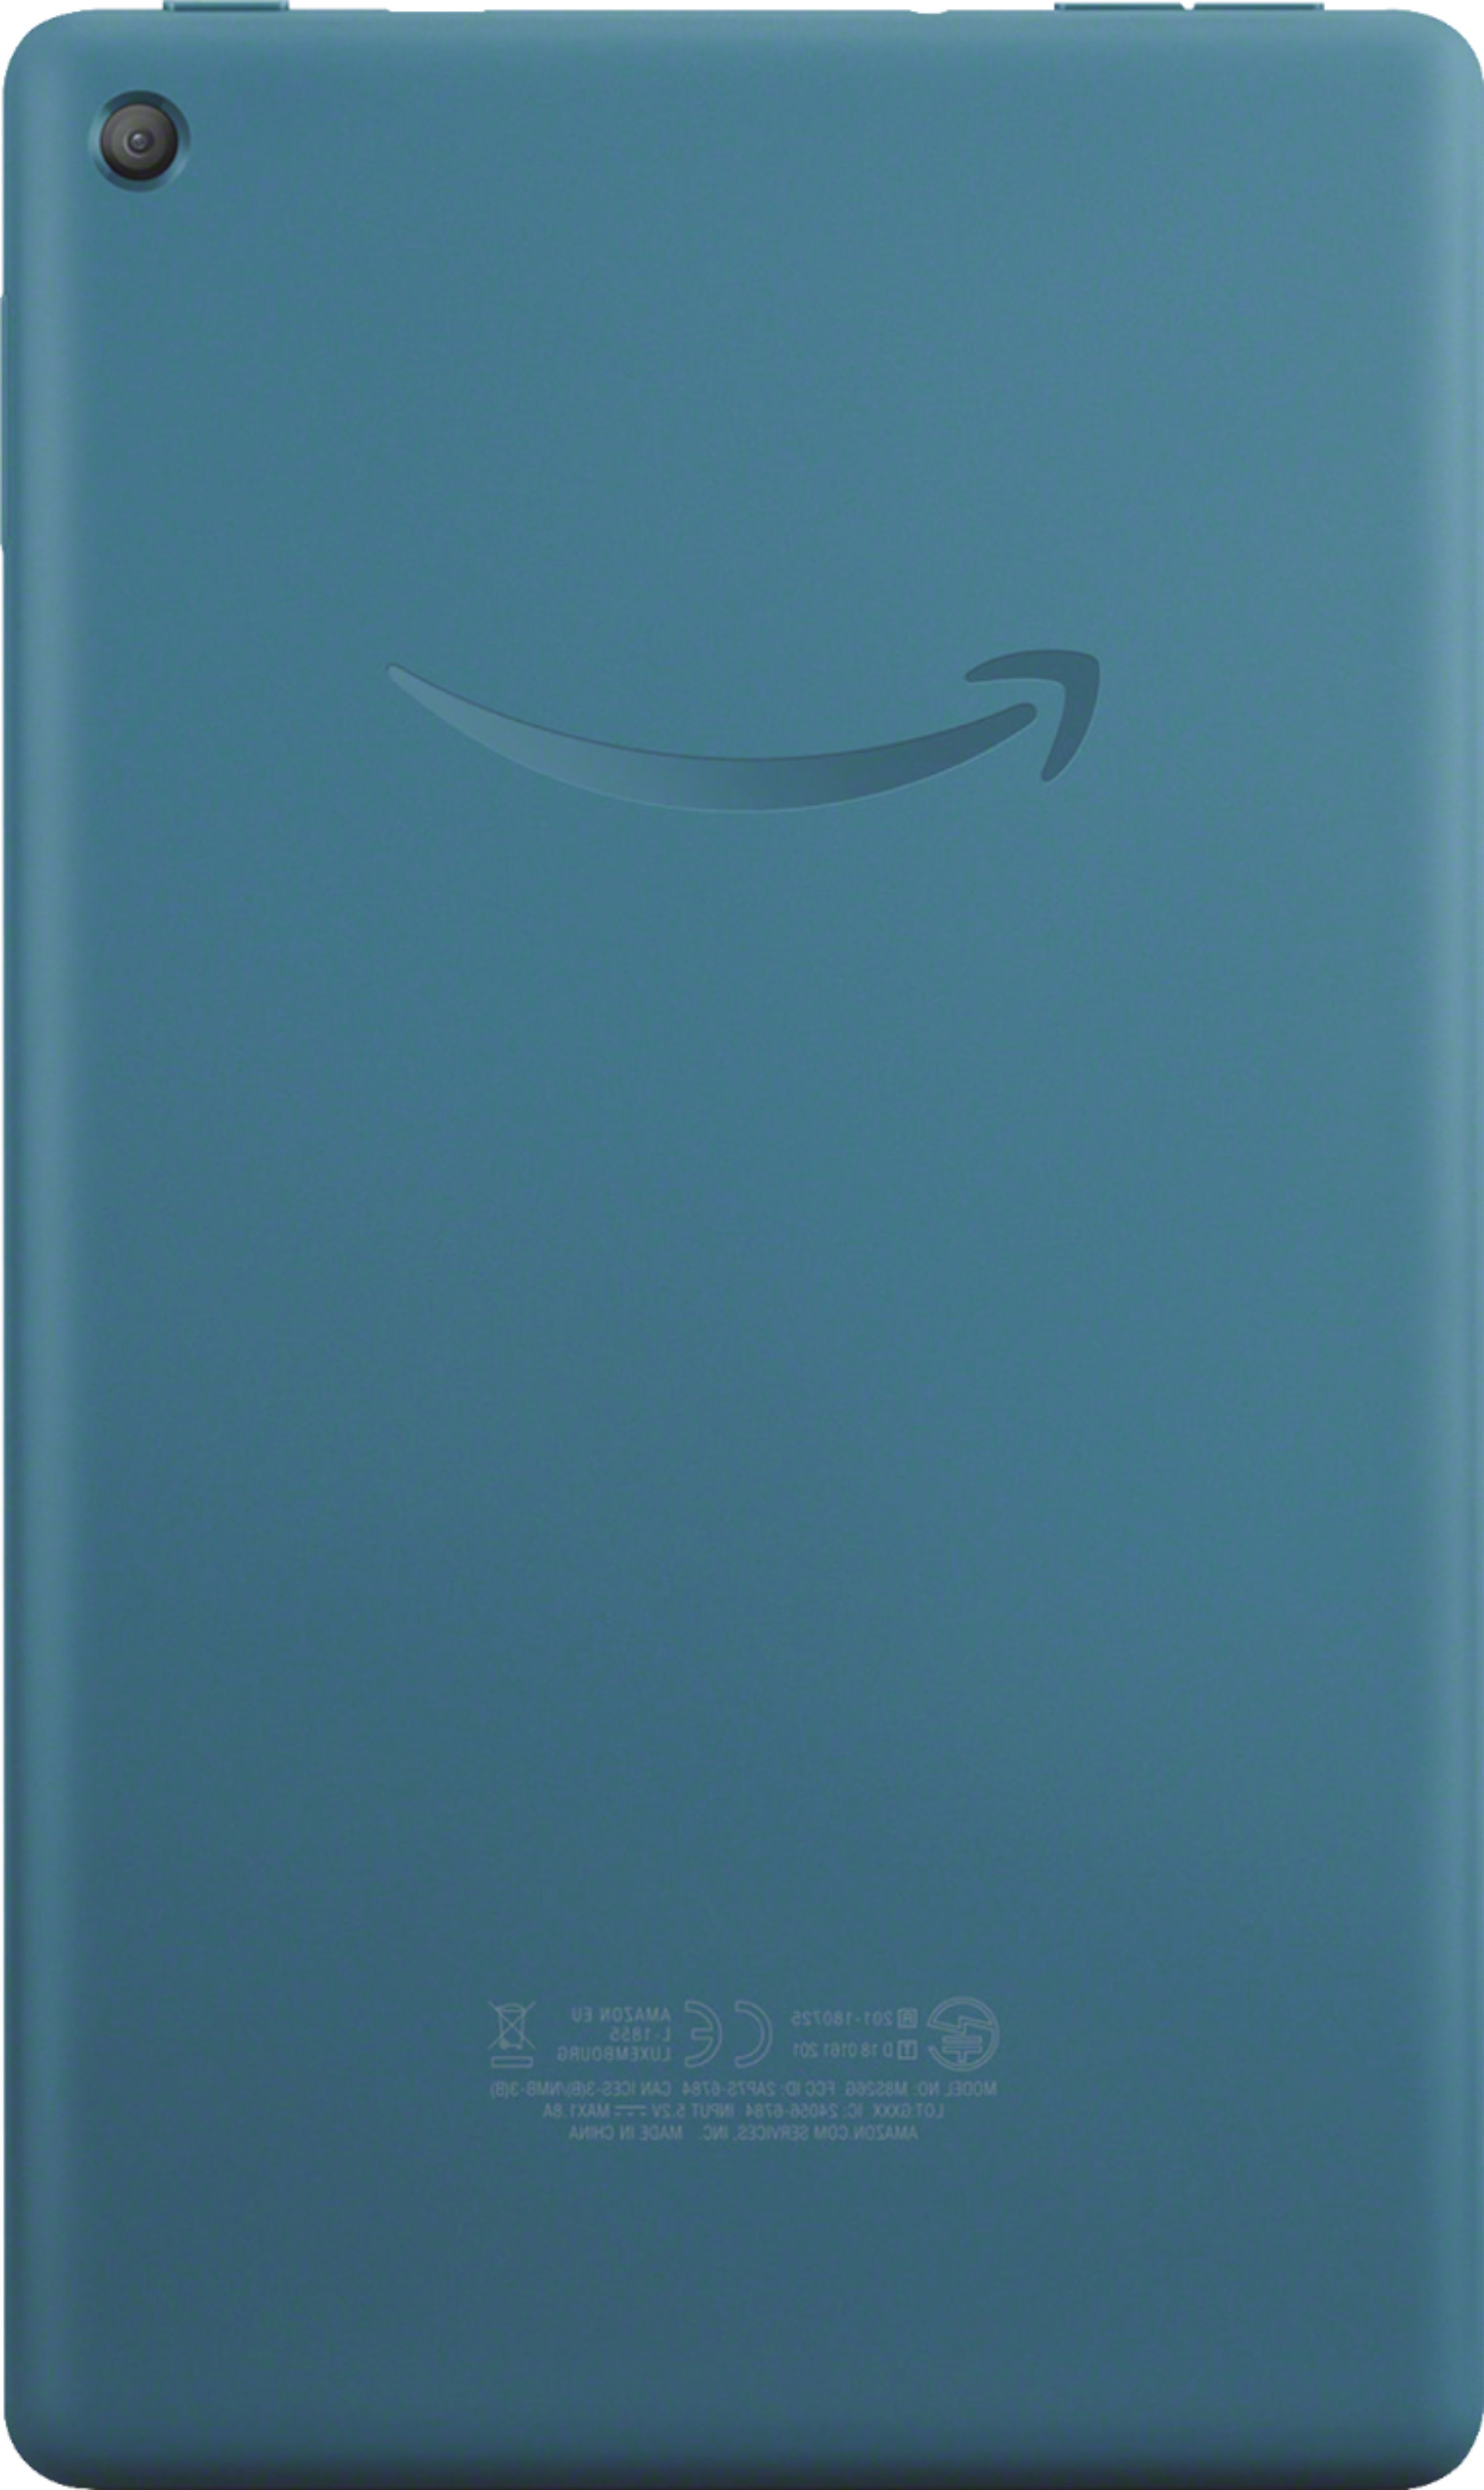 Back View: Amazon - Fire 7 Tablet (7" display, 16 GB) - Twilight Blue